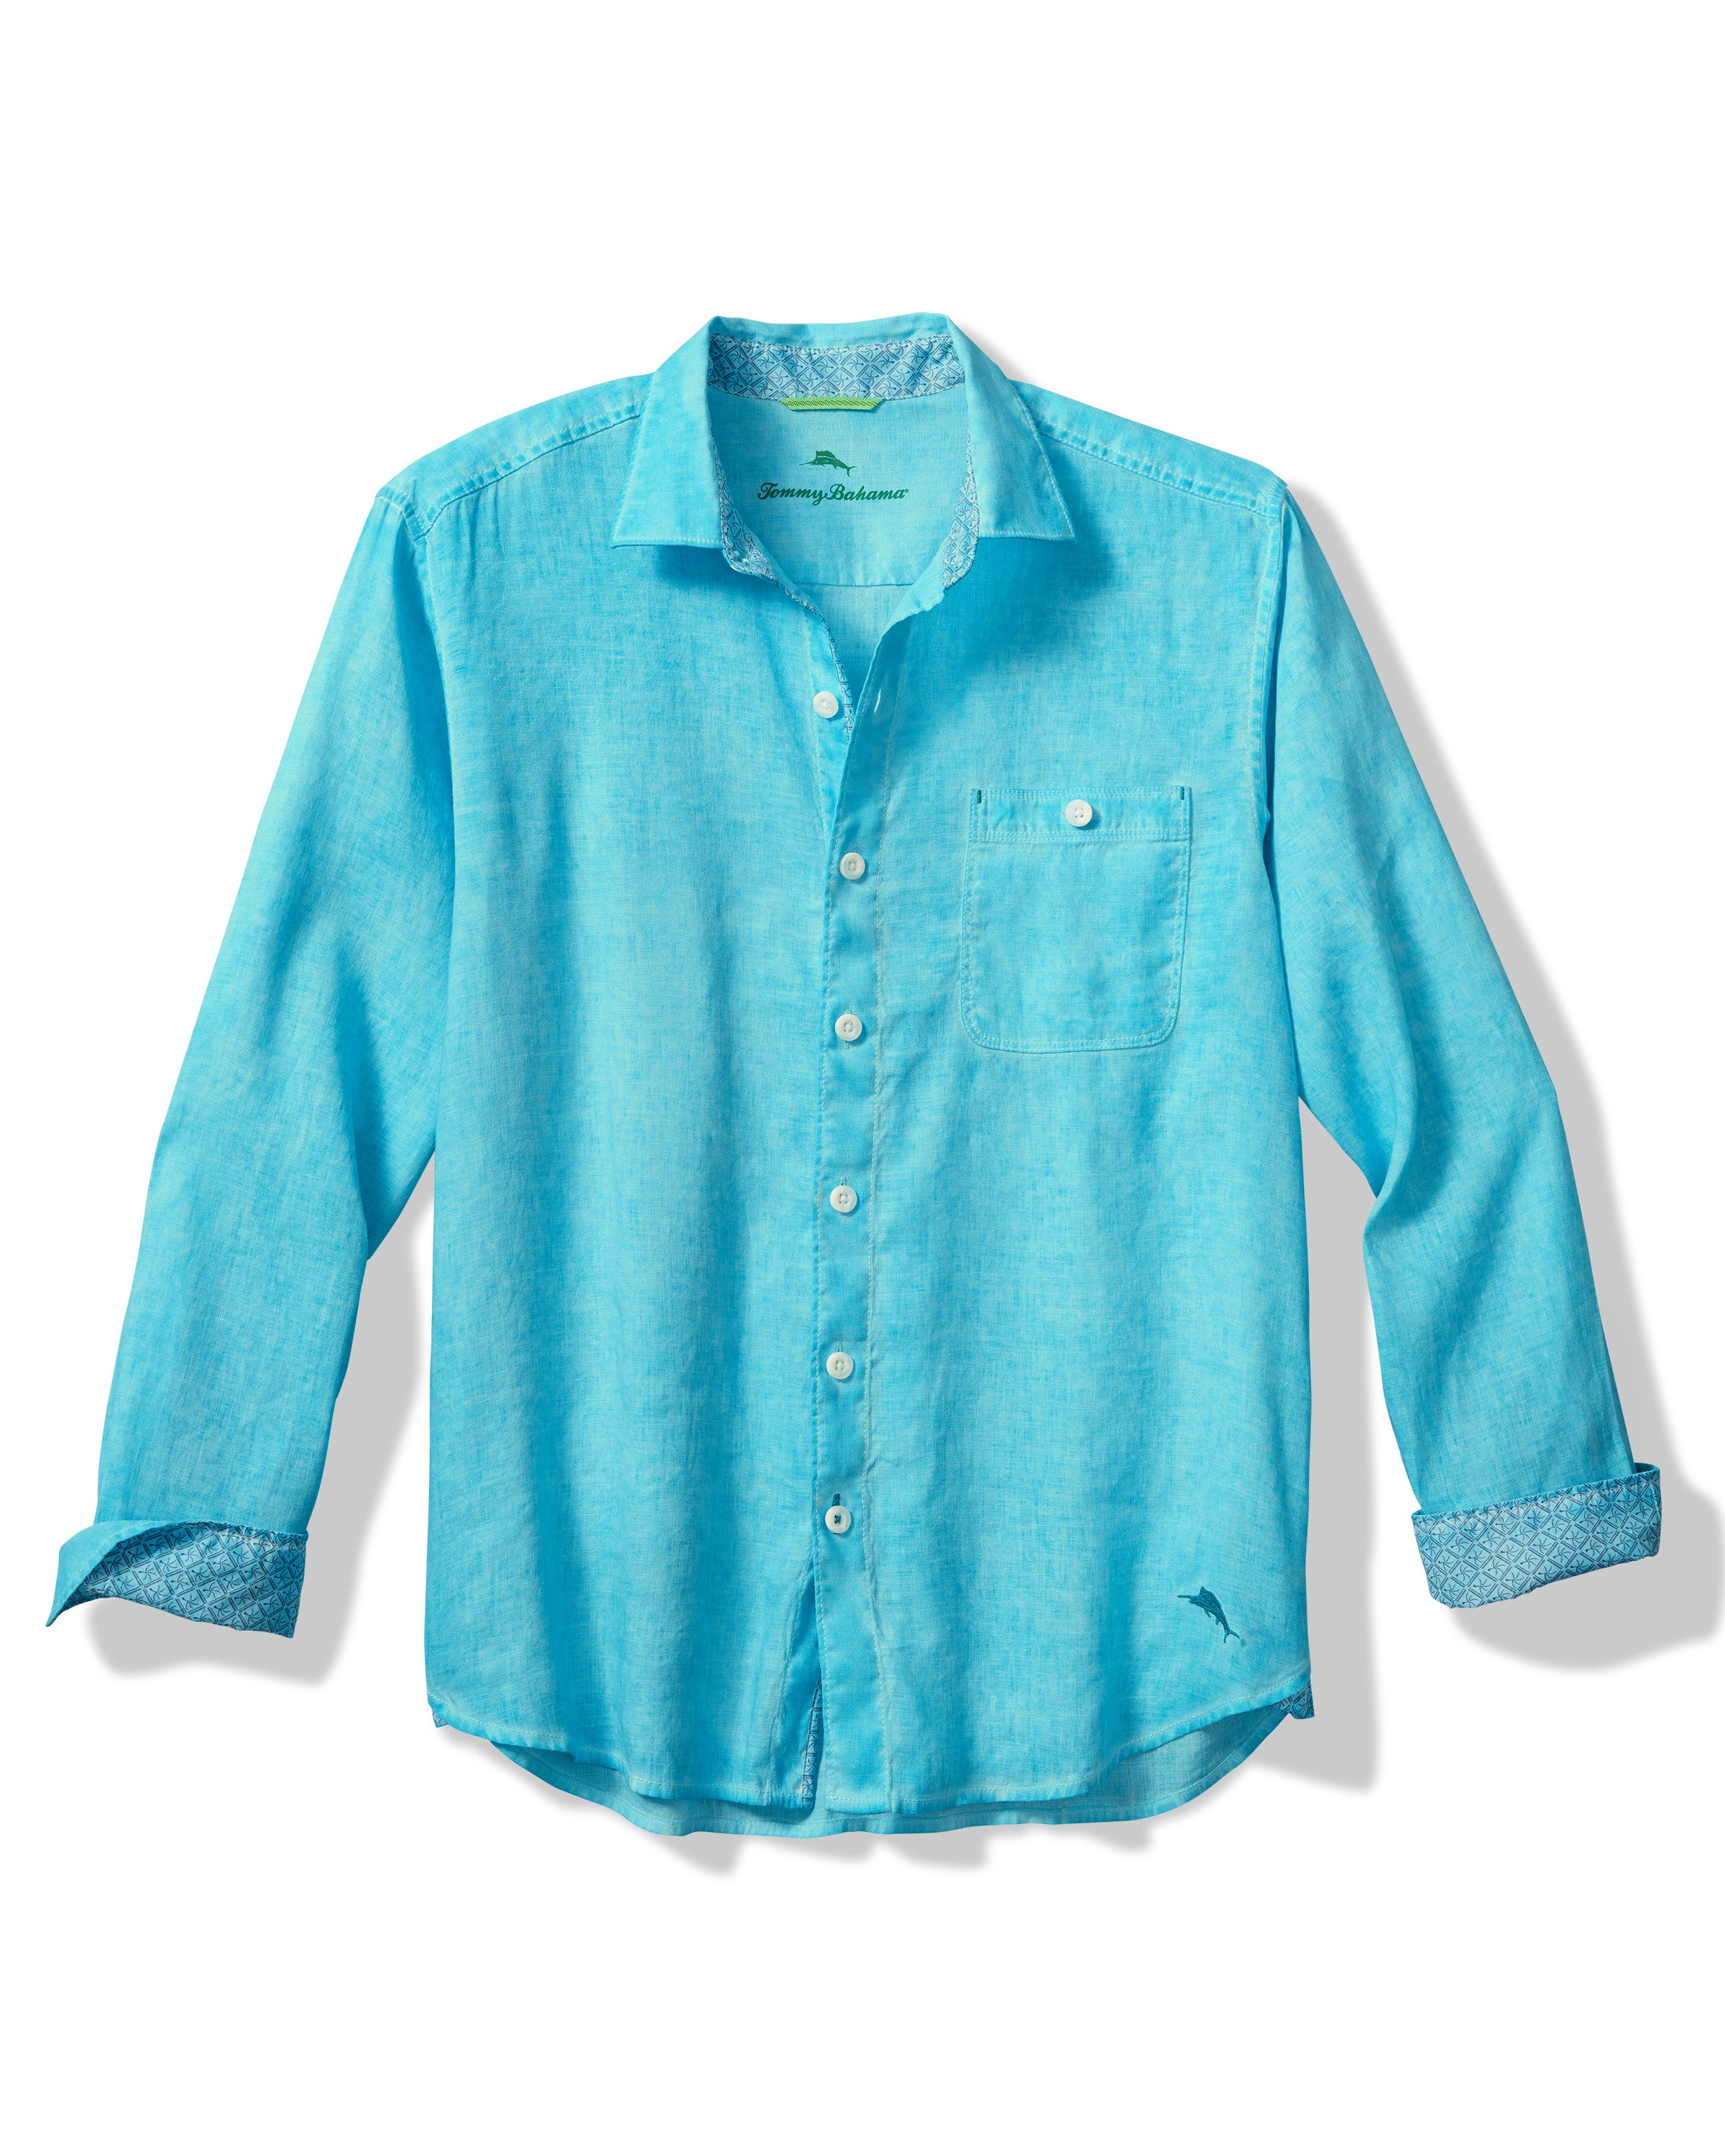 Escape to the islands with the Tommy Bahama Breeze Fade Linen Shirt! This luxurious shirt in Horizon blue will make you feel like you're on a tropical vacation. Made from high-quality linen, it will keep you cool and comfortable while adding a touch of island style to any wardrobe.